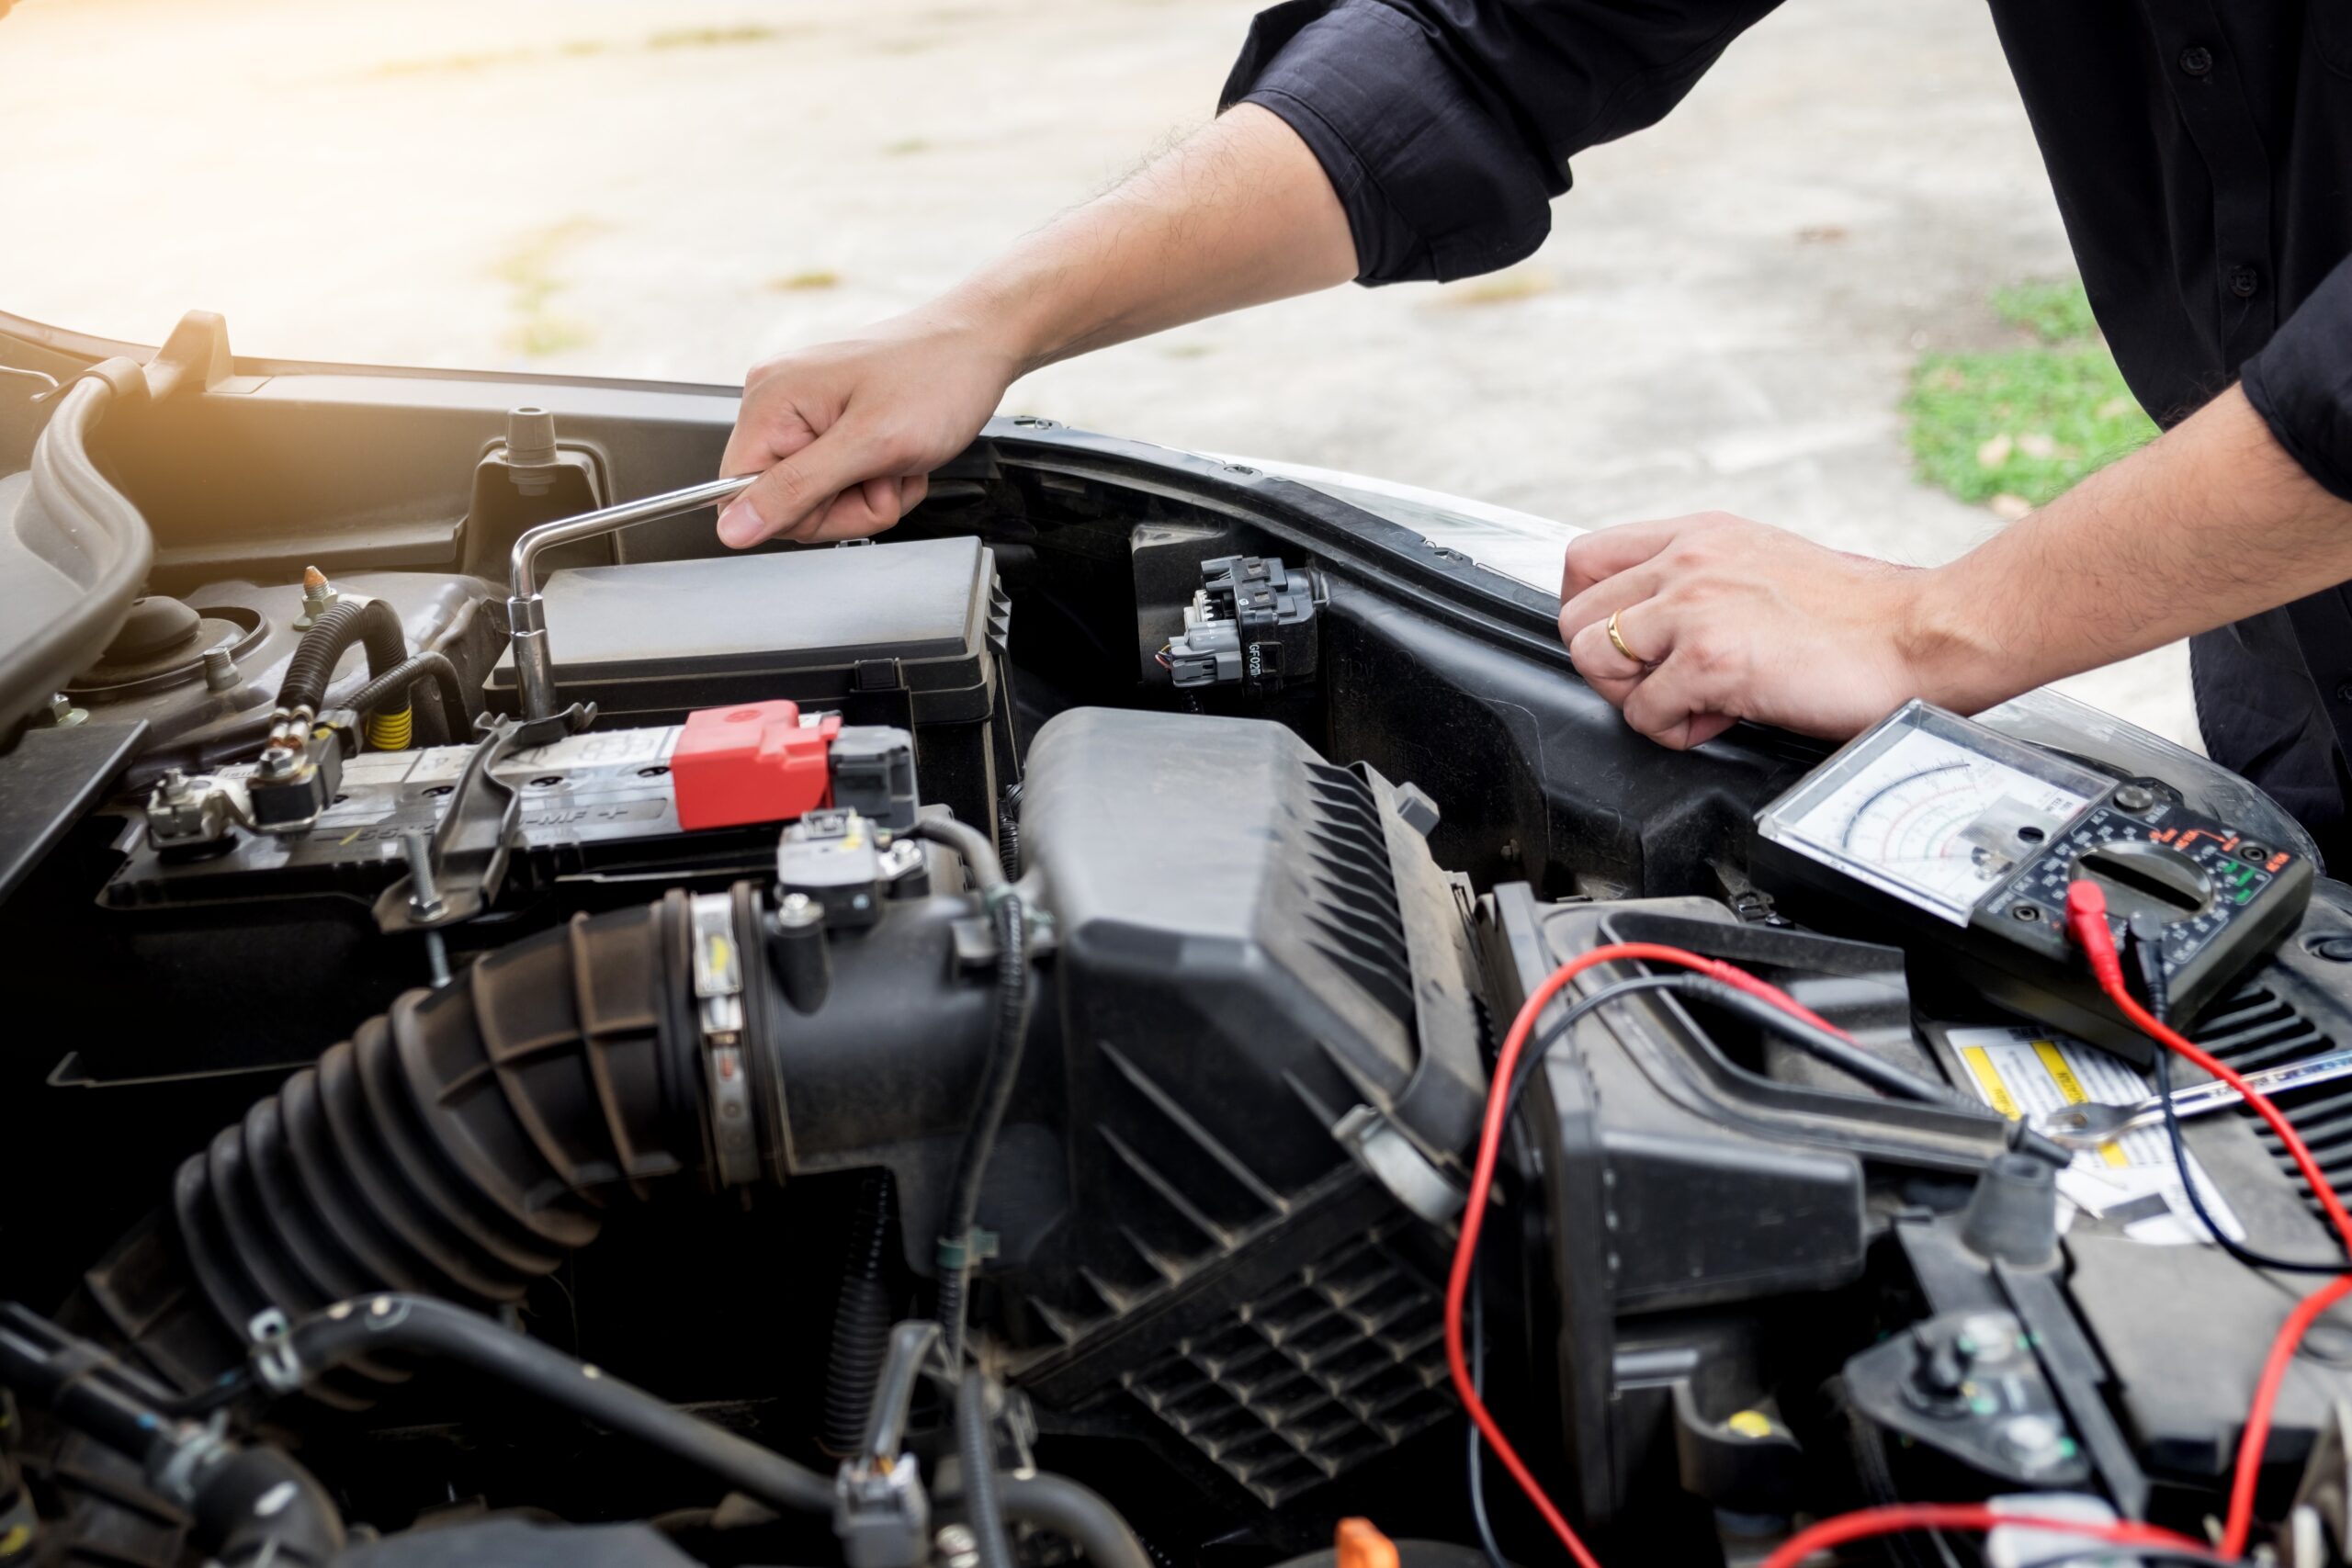 How to Keep Your Car Running Smoothly: Basic Car Maintenance at Home